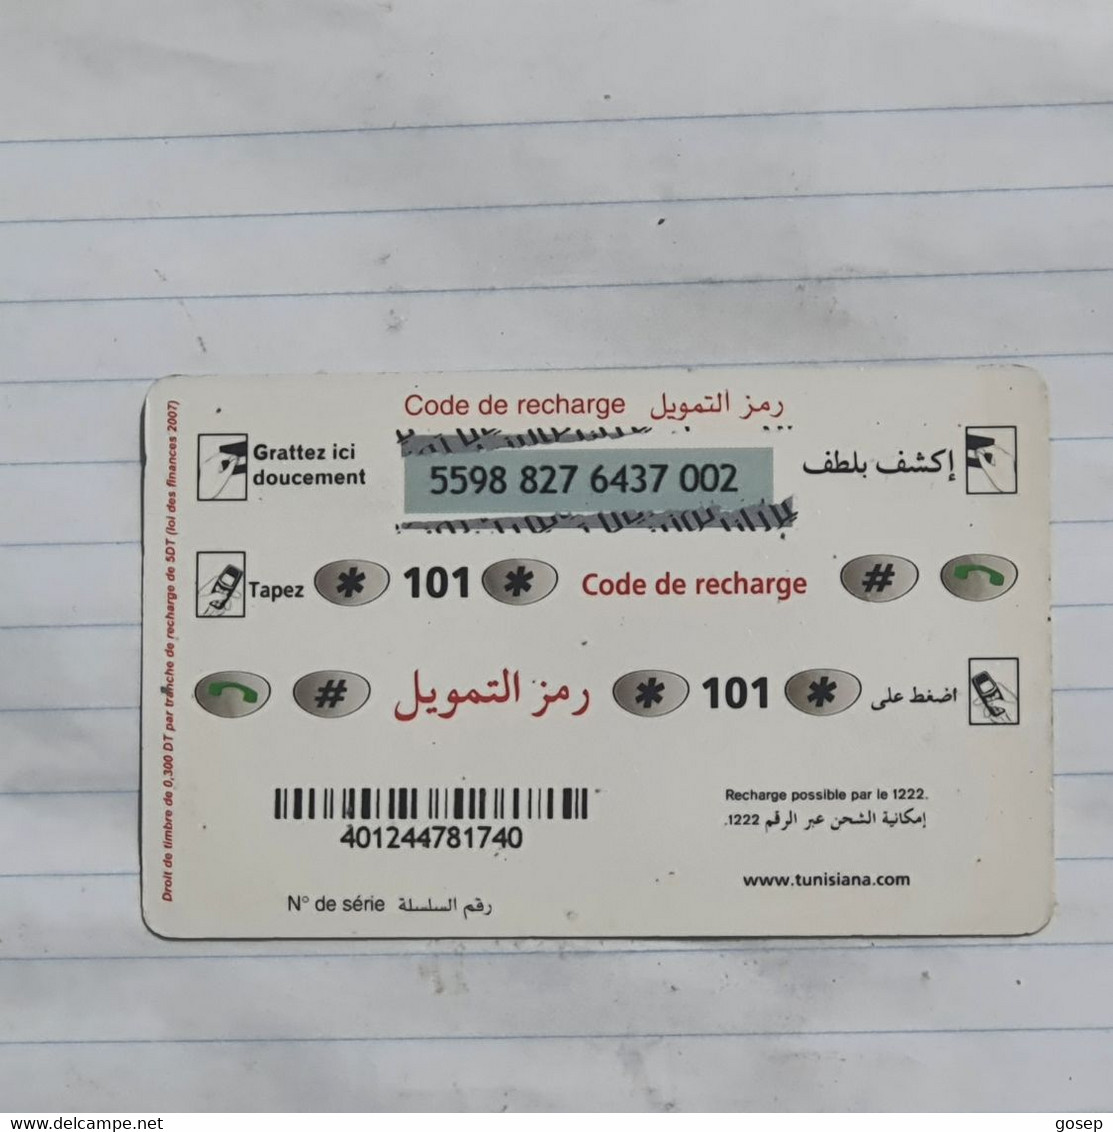 TUNISIA-(TUN-REF-TUN-25)-Chanteuse-(152)-(5598-827-6437-002)-(look From Out Side Card Barcode)-used Card - Tunisia